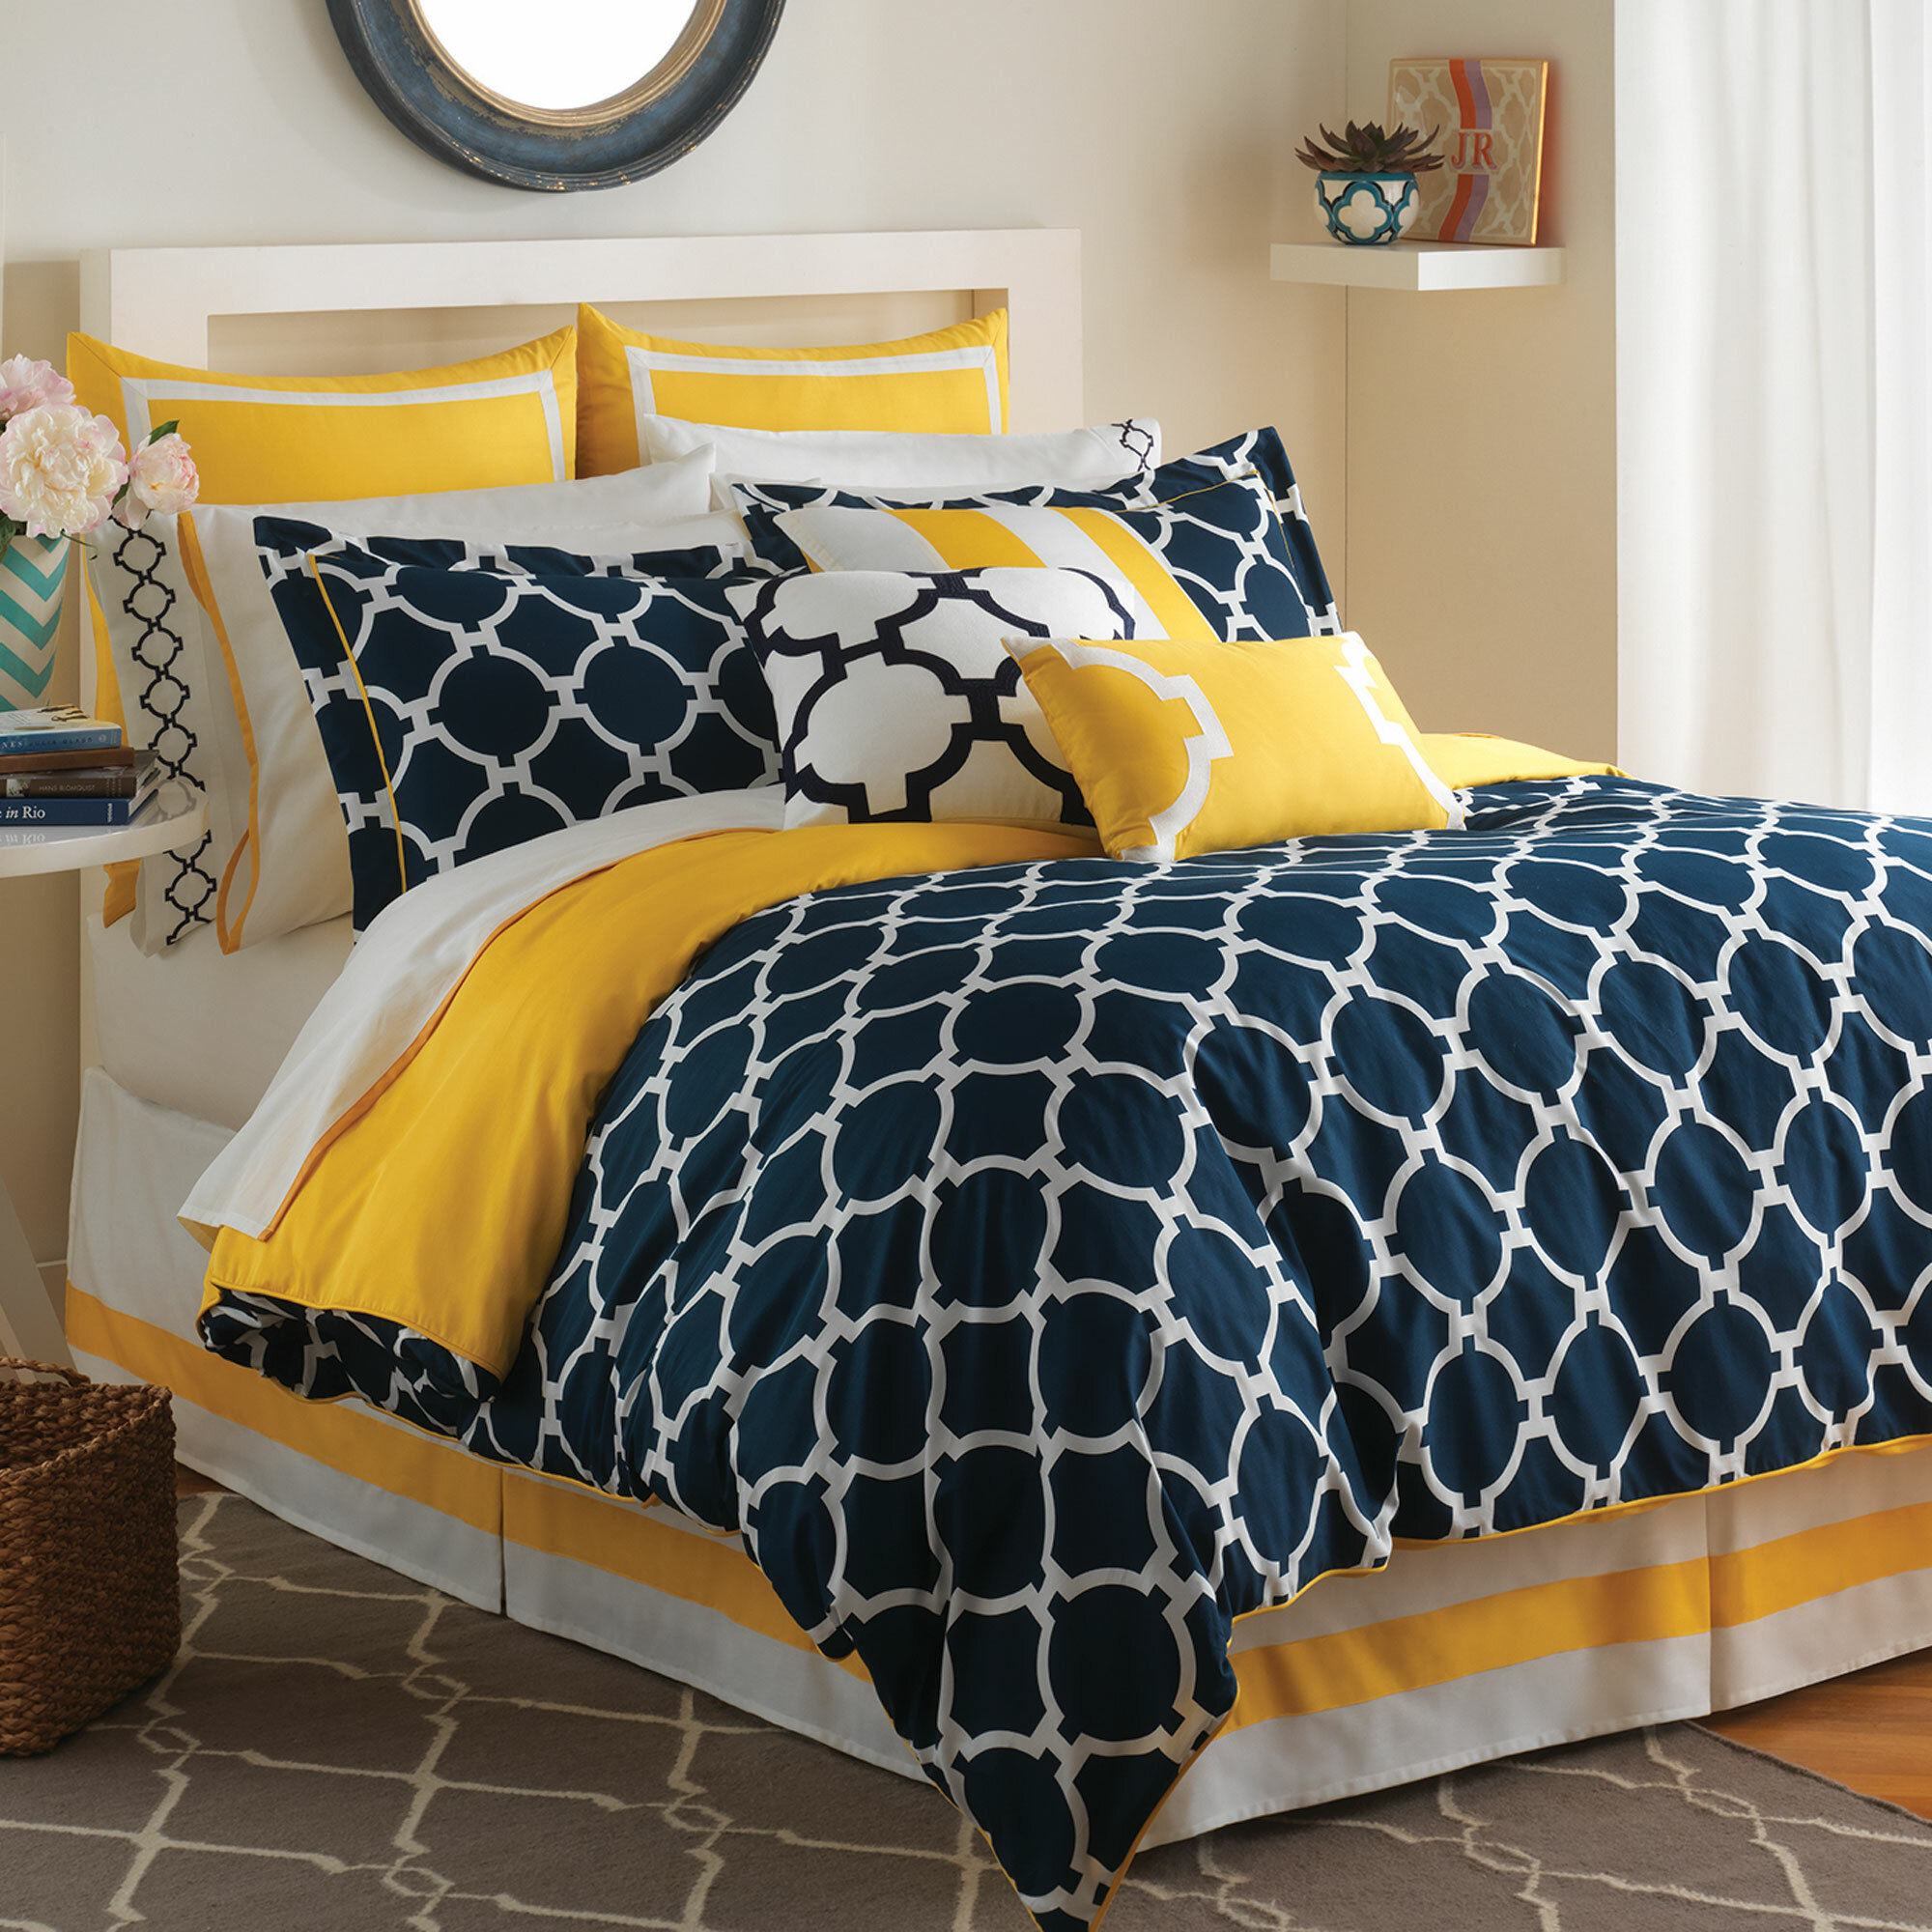 blue white and yellow comforter